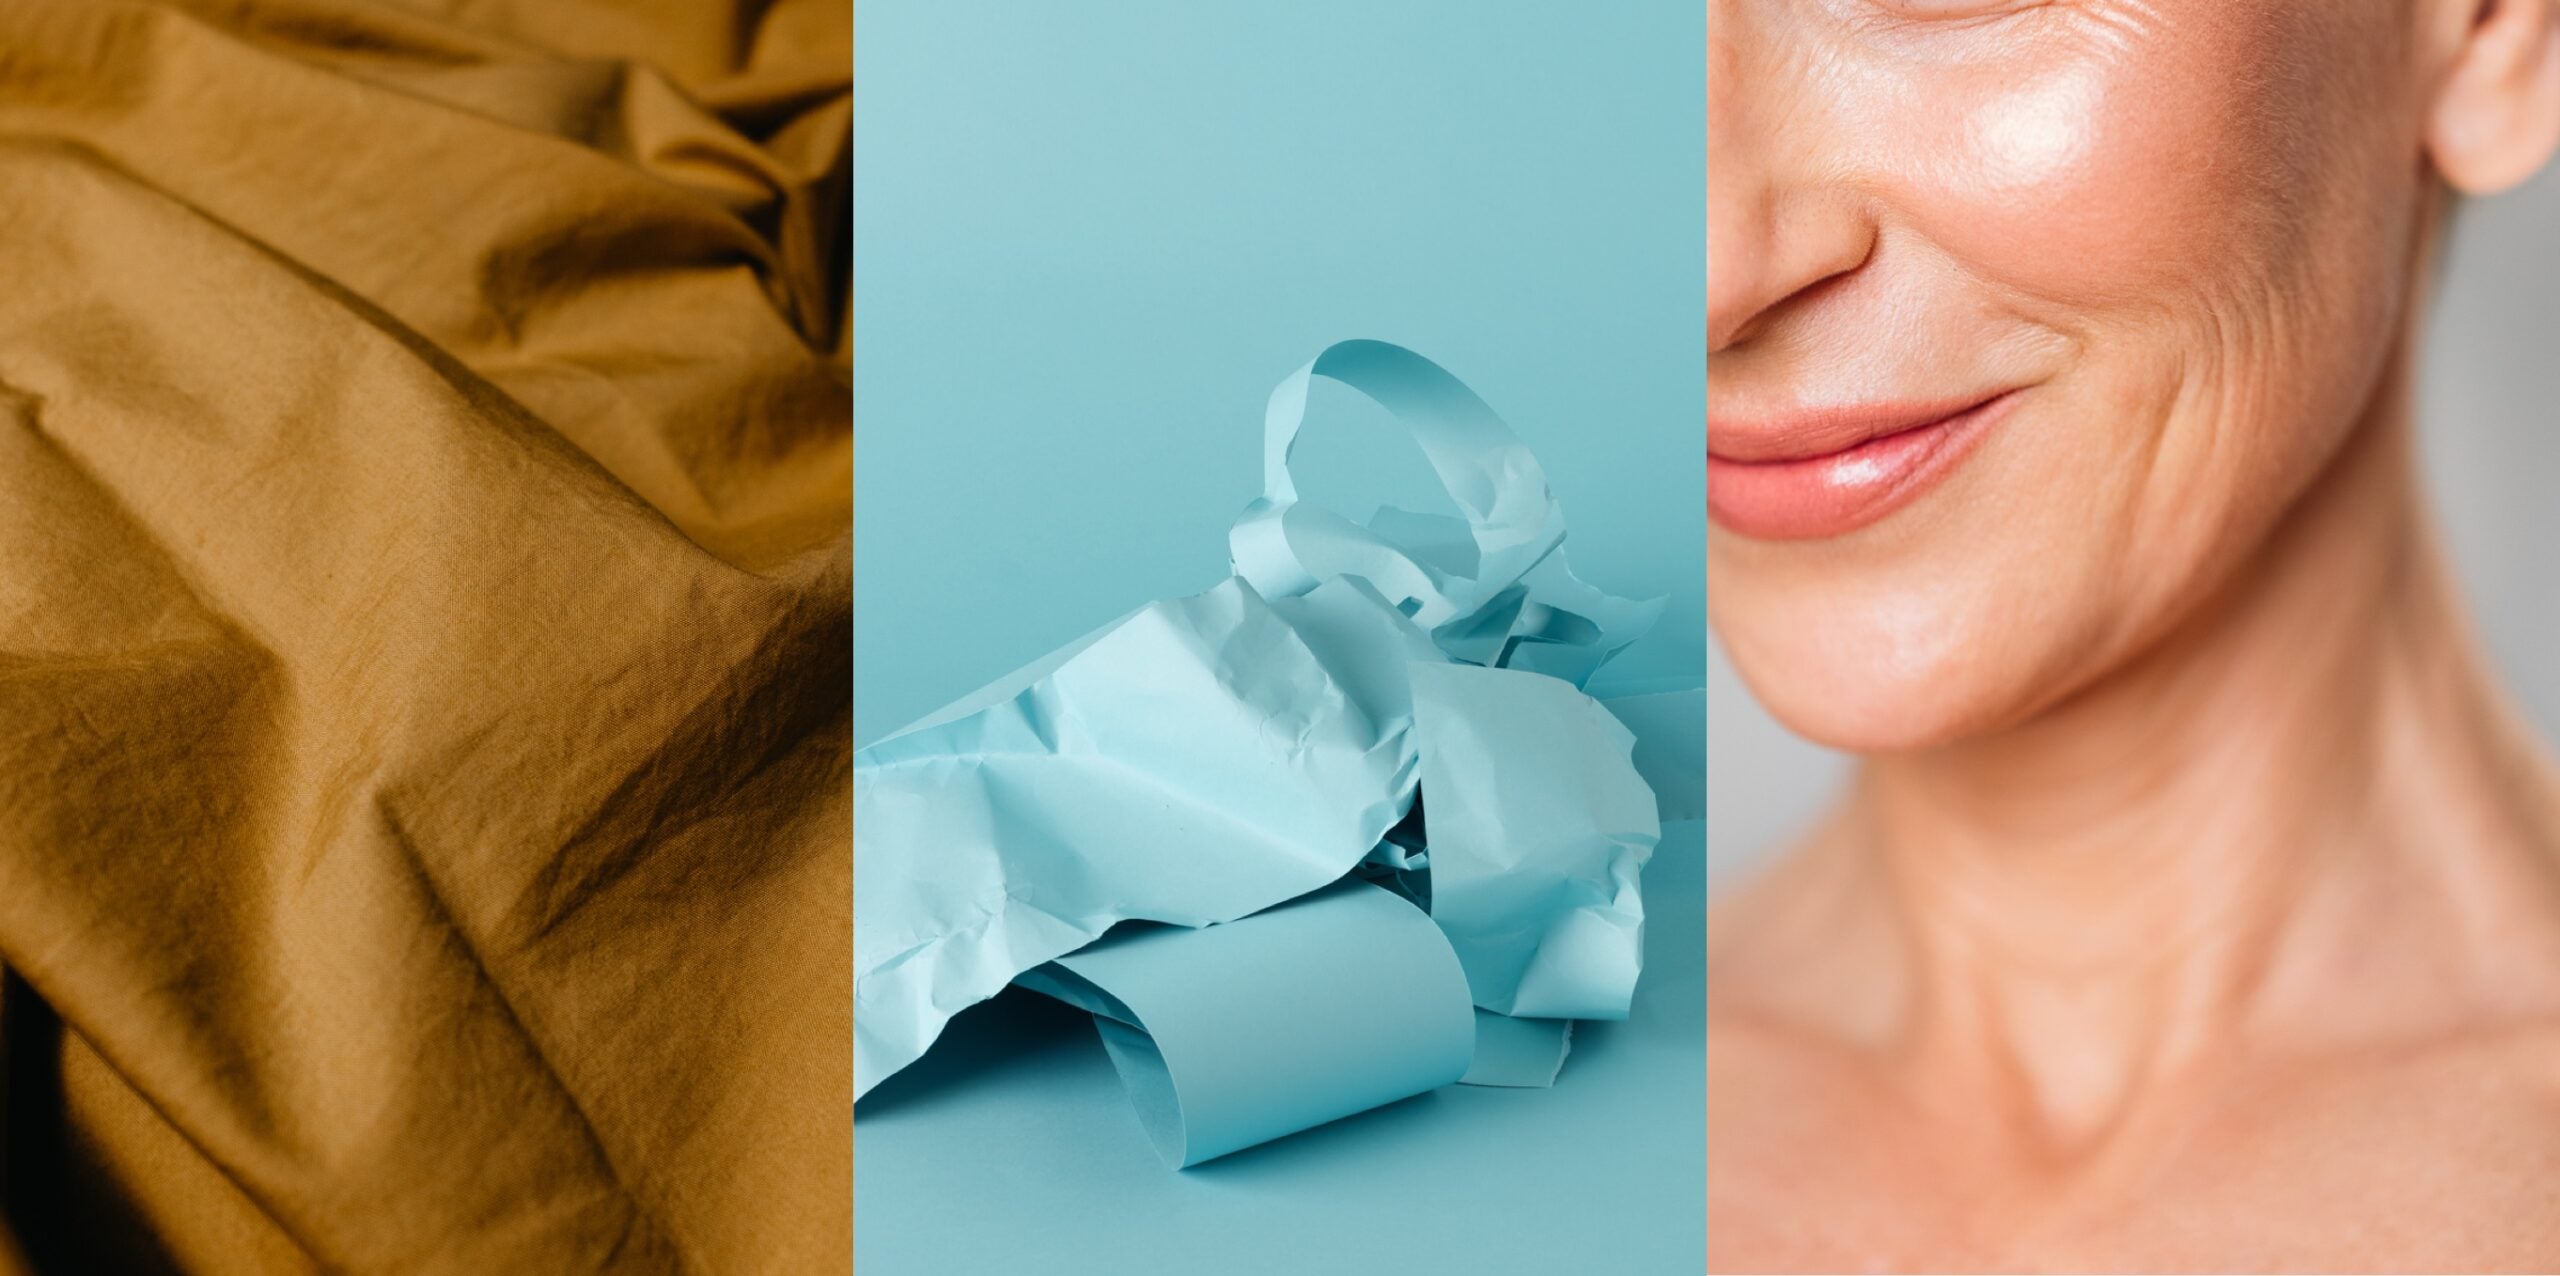 Wrinkle wrap-up, part 1: The bottom line on preventing wrinkles? Do these 5 things every. Single. Day.